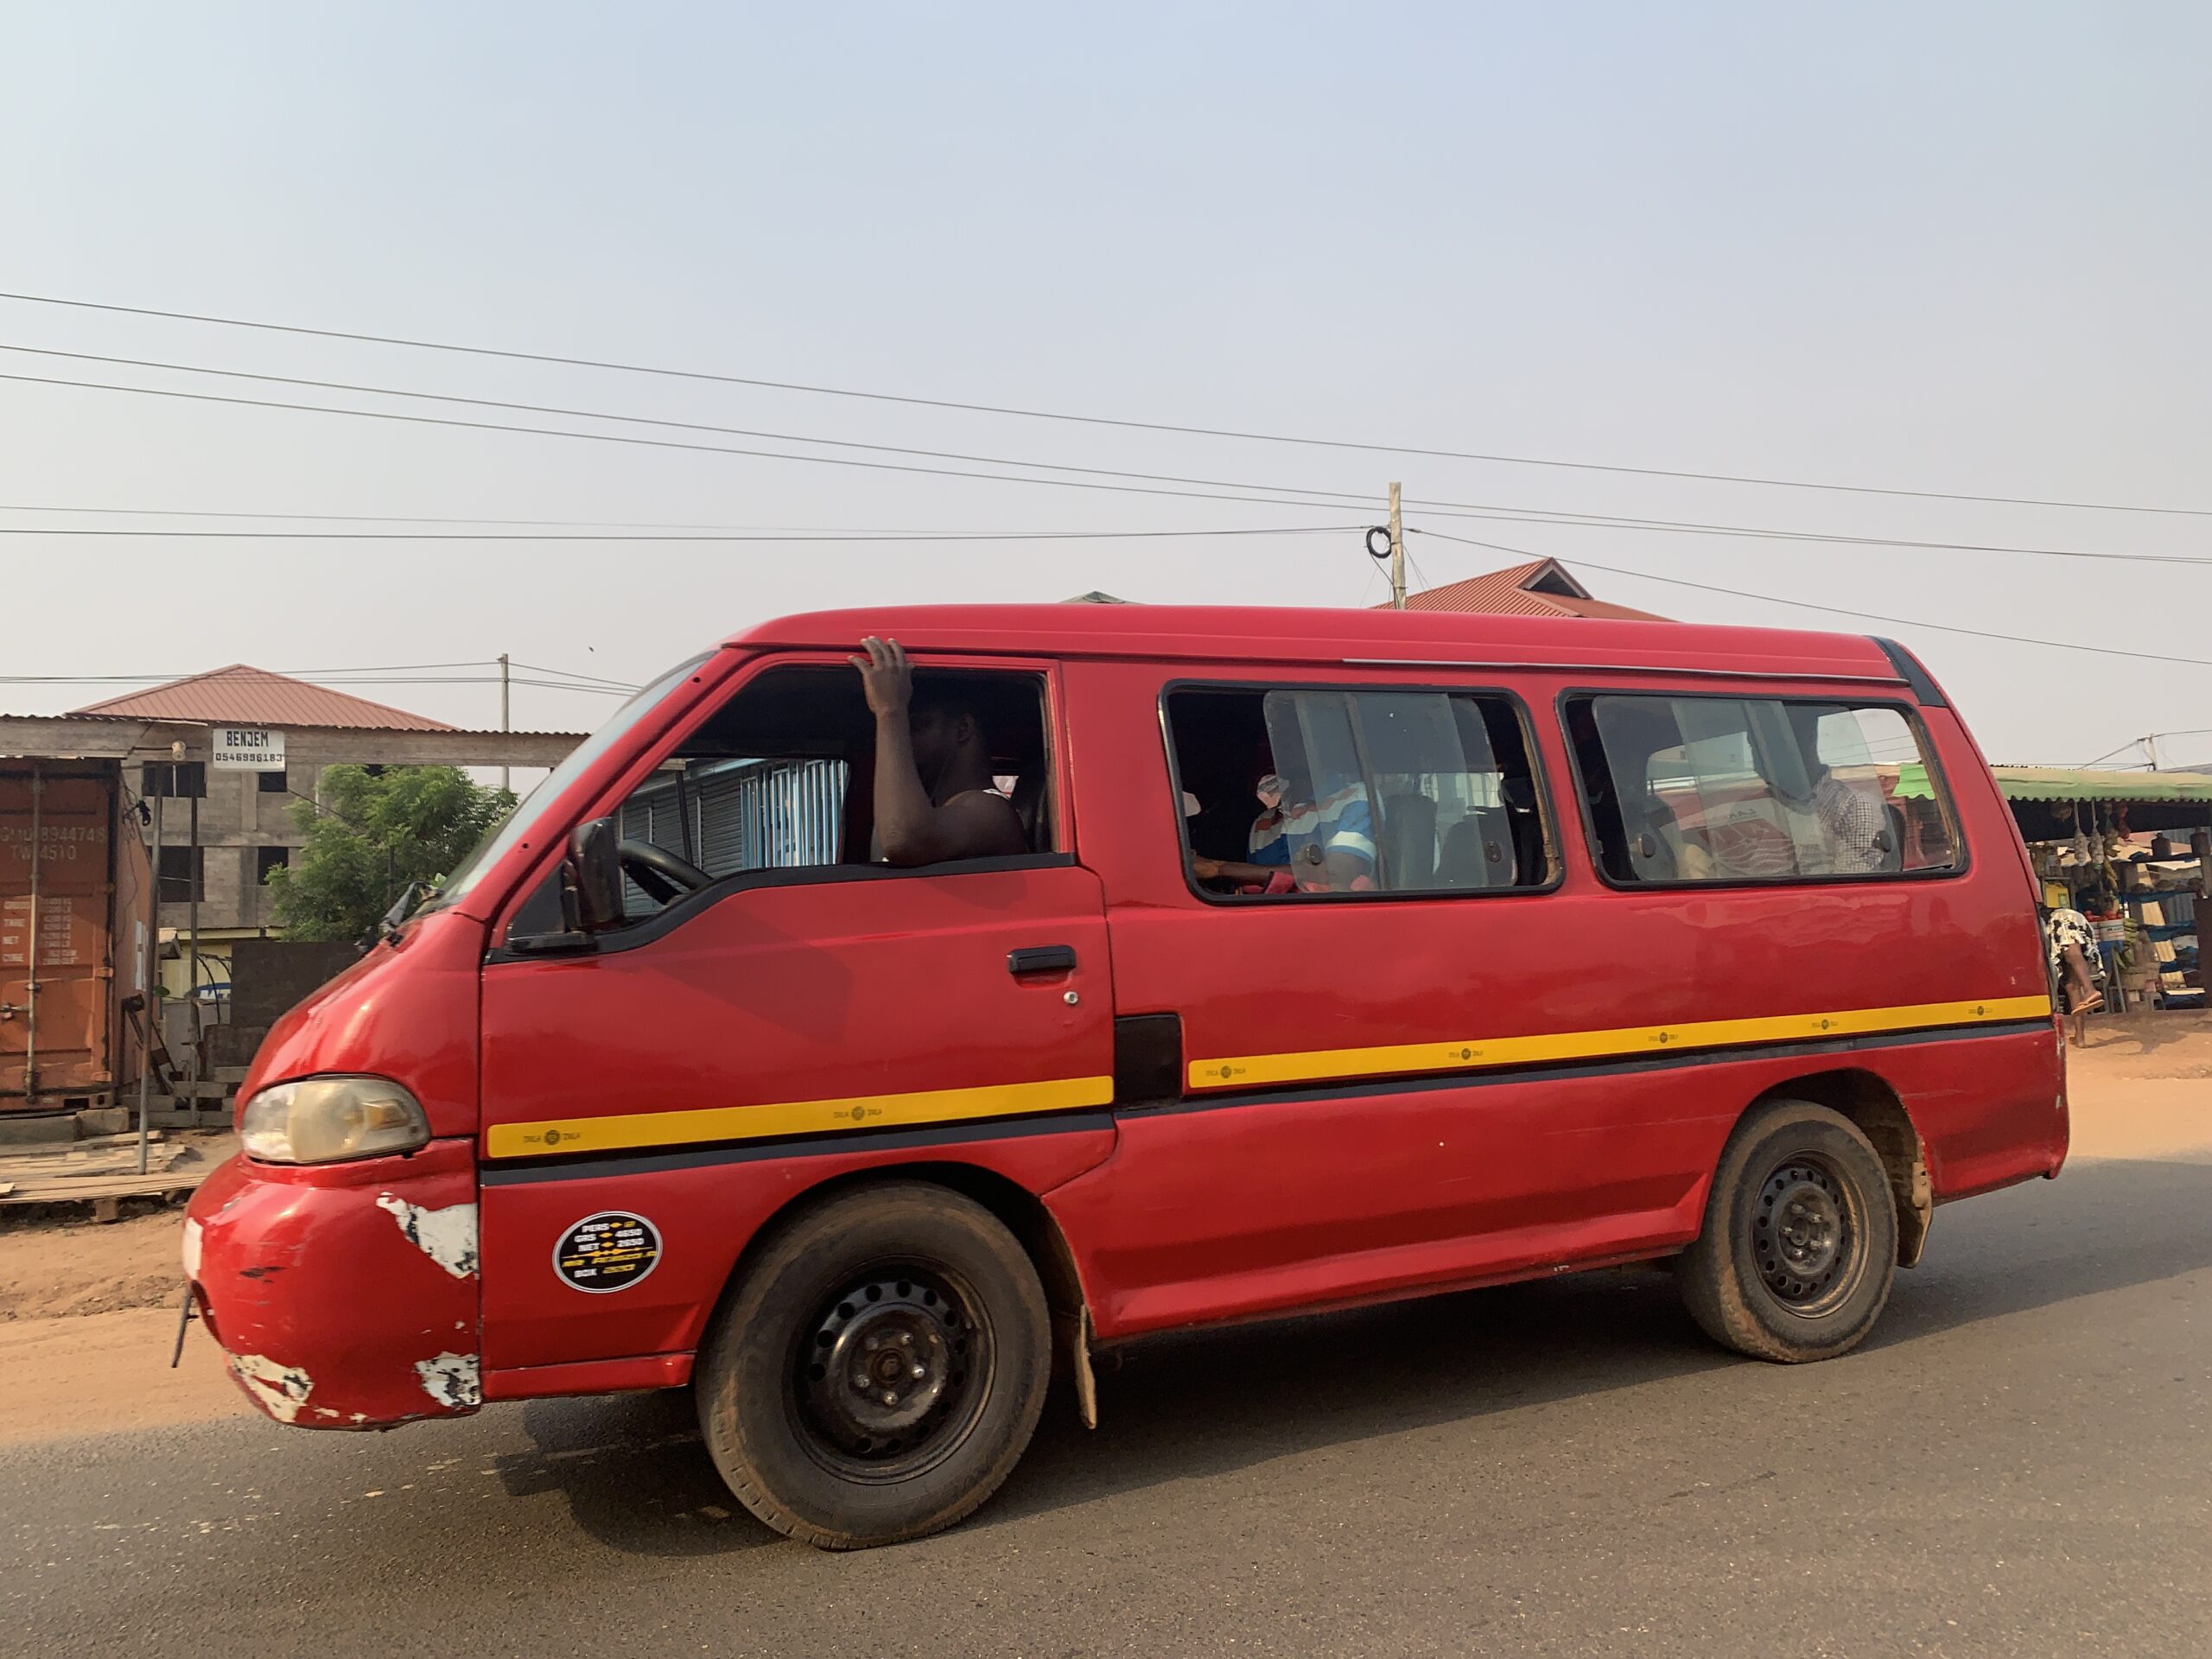 A red tro-tro driving on the road in Accra.